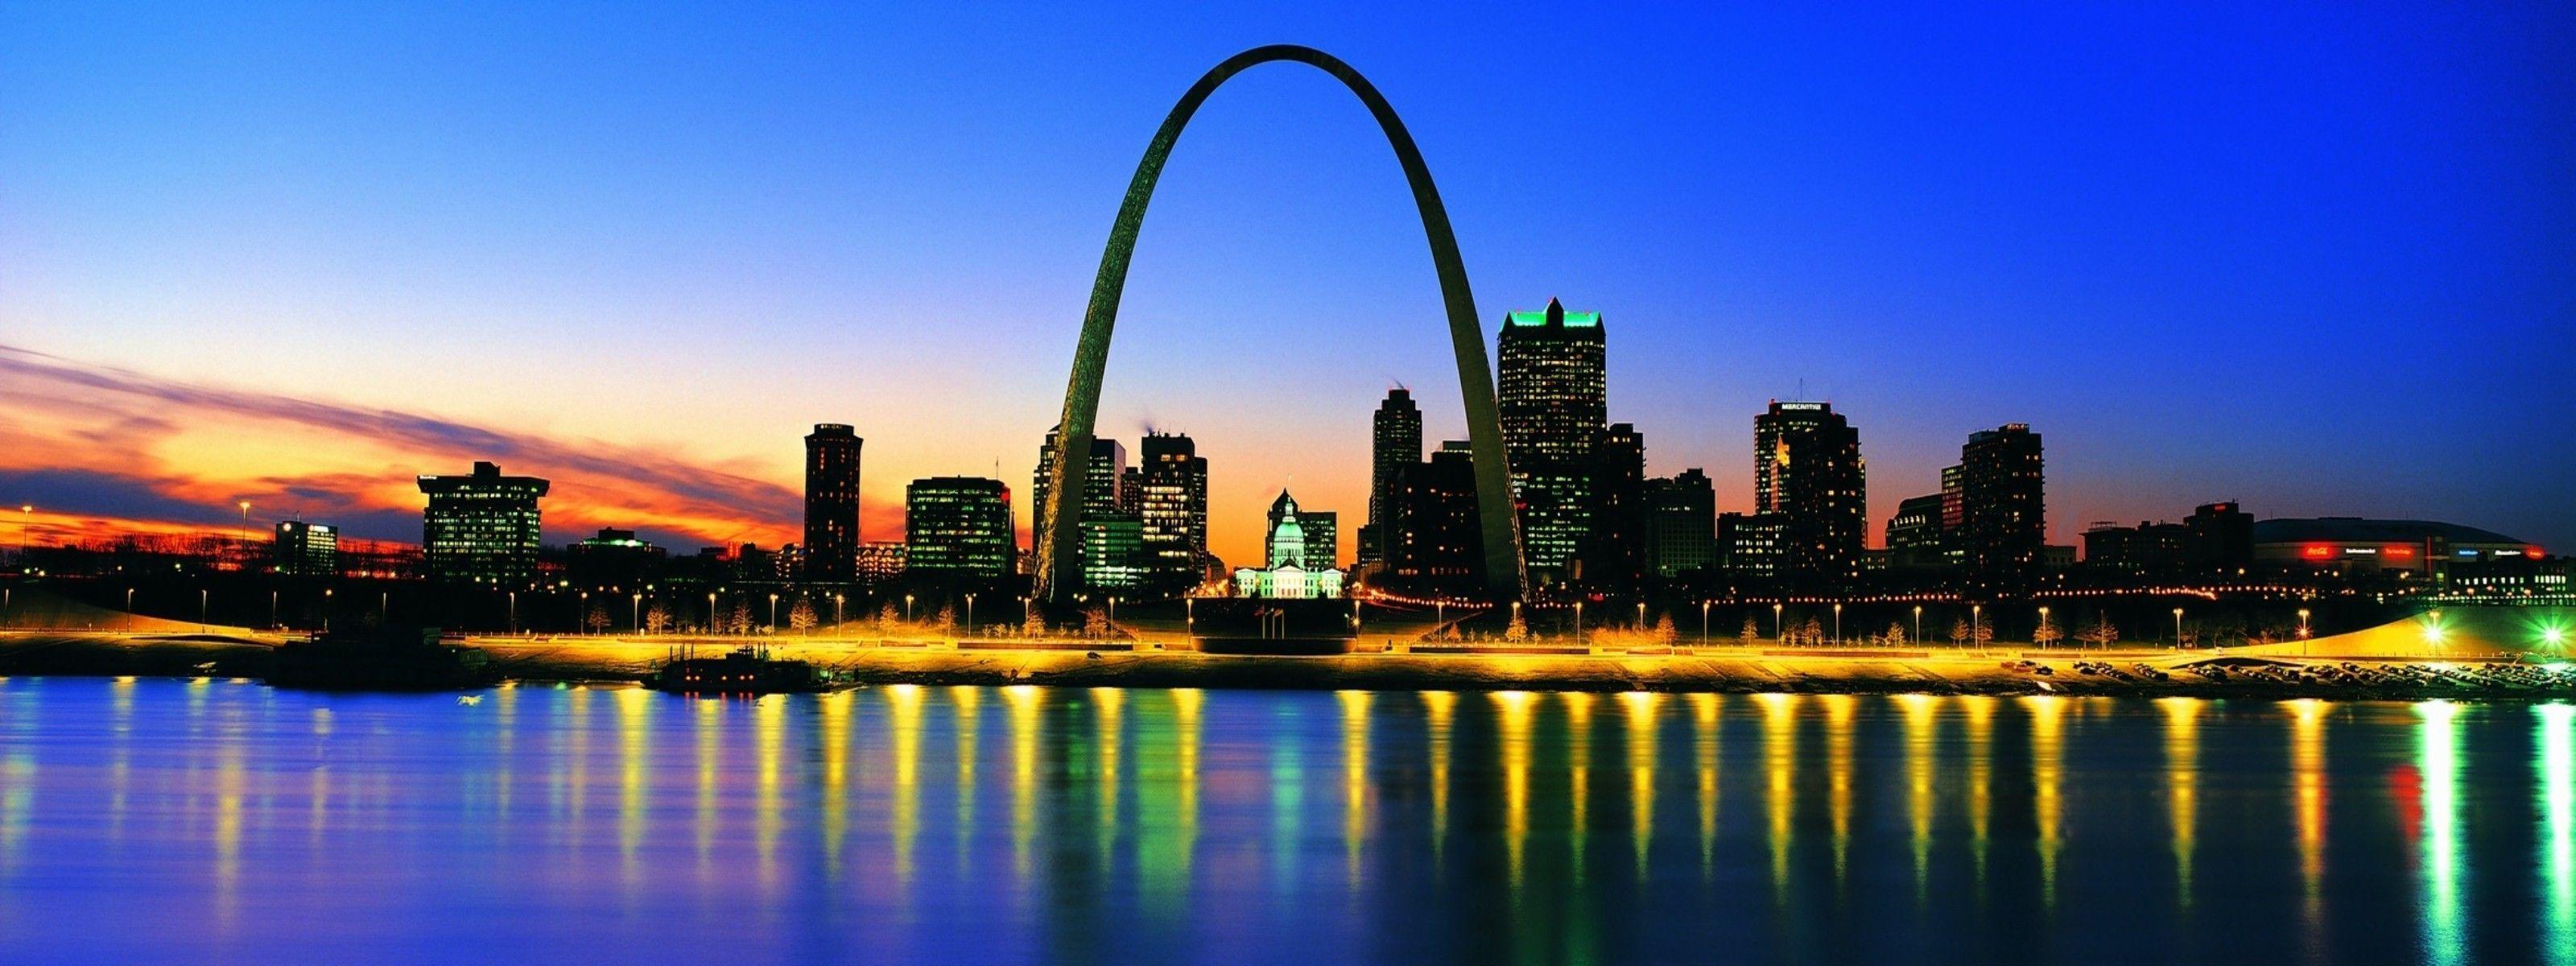 St Louis Wallpapers